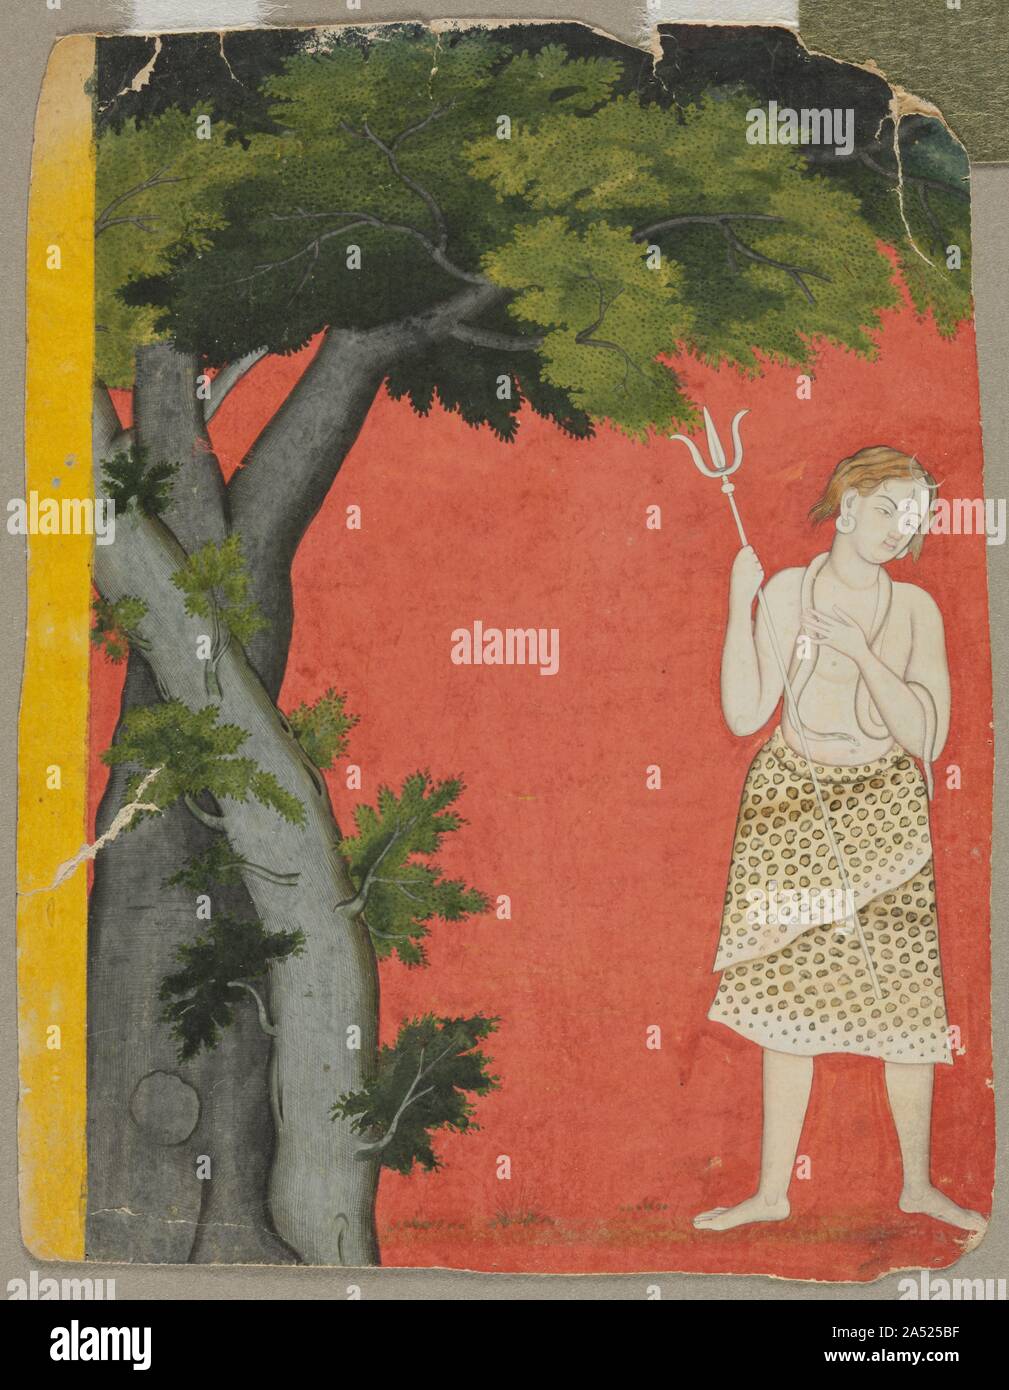 Shiva Under Trees, c. 1780. Cut from a larger composition, this fragment shows the god Shiva who has come down to earth. He seems alluringly approachable despite his white body, the snake around his neck, his third eye, trident weapon, animal-skin garment, and the crescent moon at his brow. Set off against a flat red background, he stands under two shade trees that make his manifestation on earth believable. One tree is entwined around the other, metaphorically suggesting the physical love Shiva seems to wistfully desire. Stock Photo